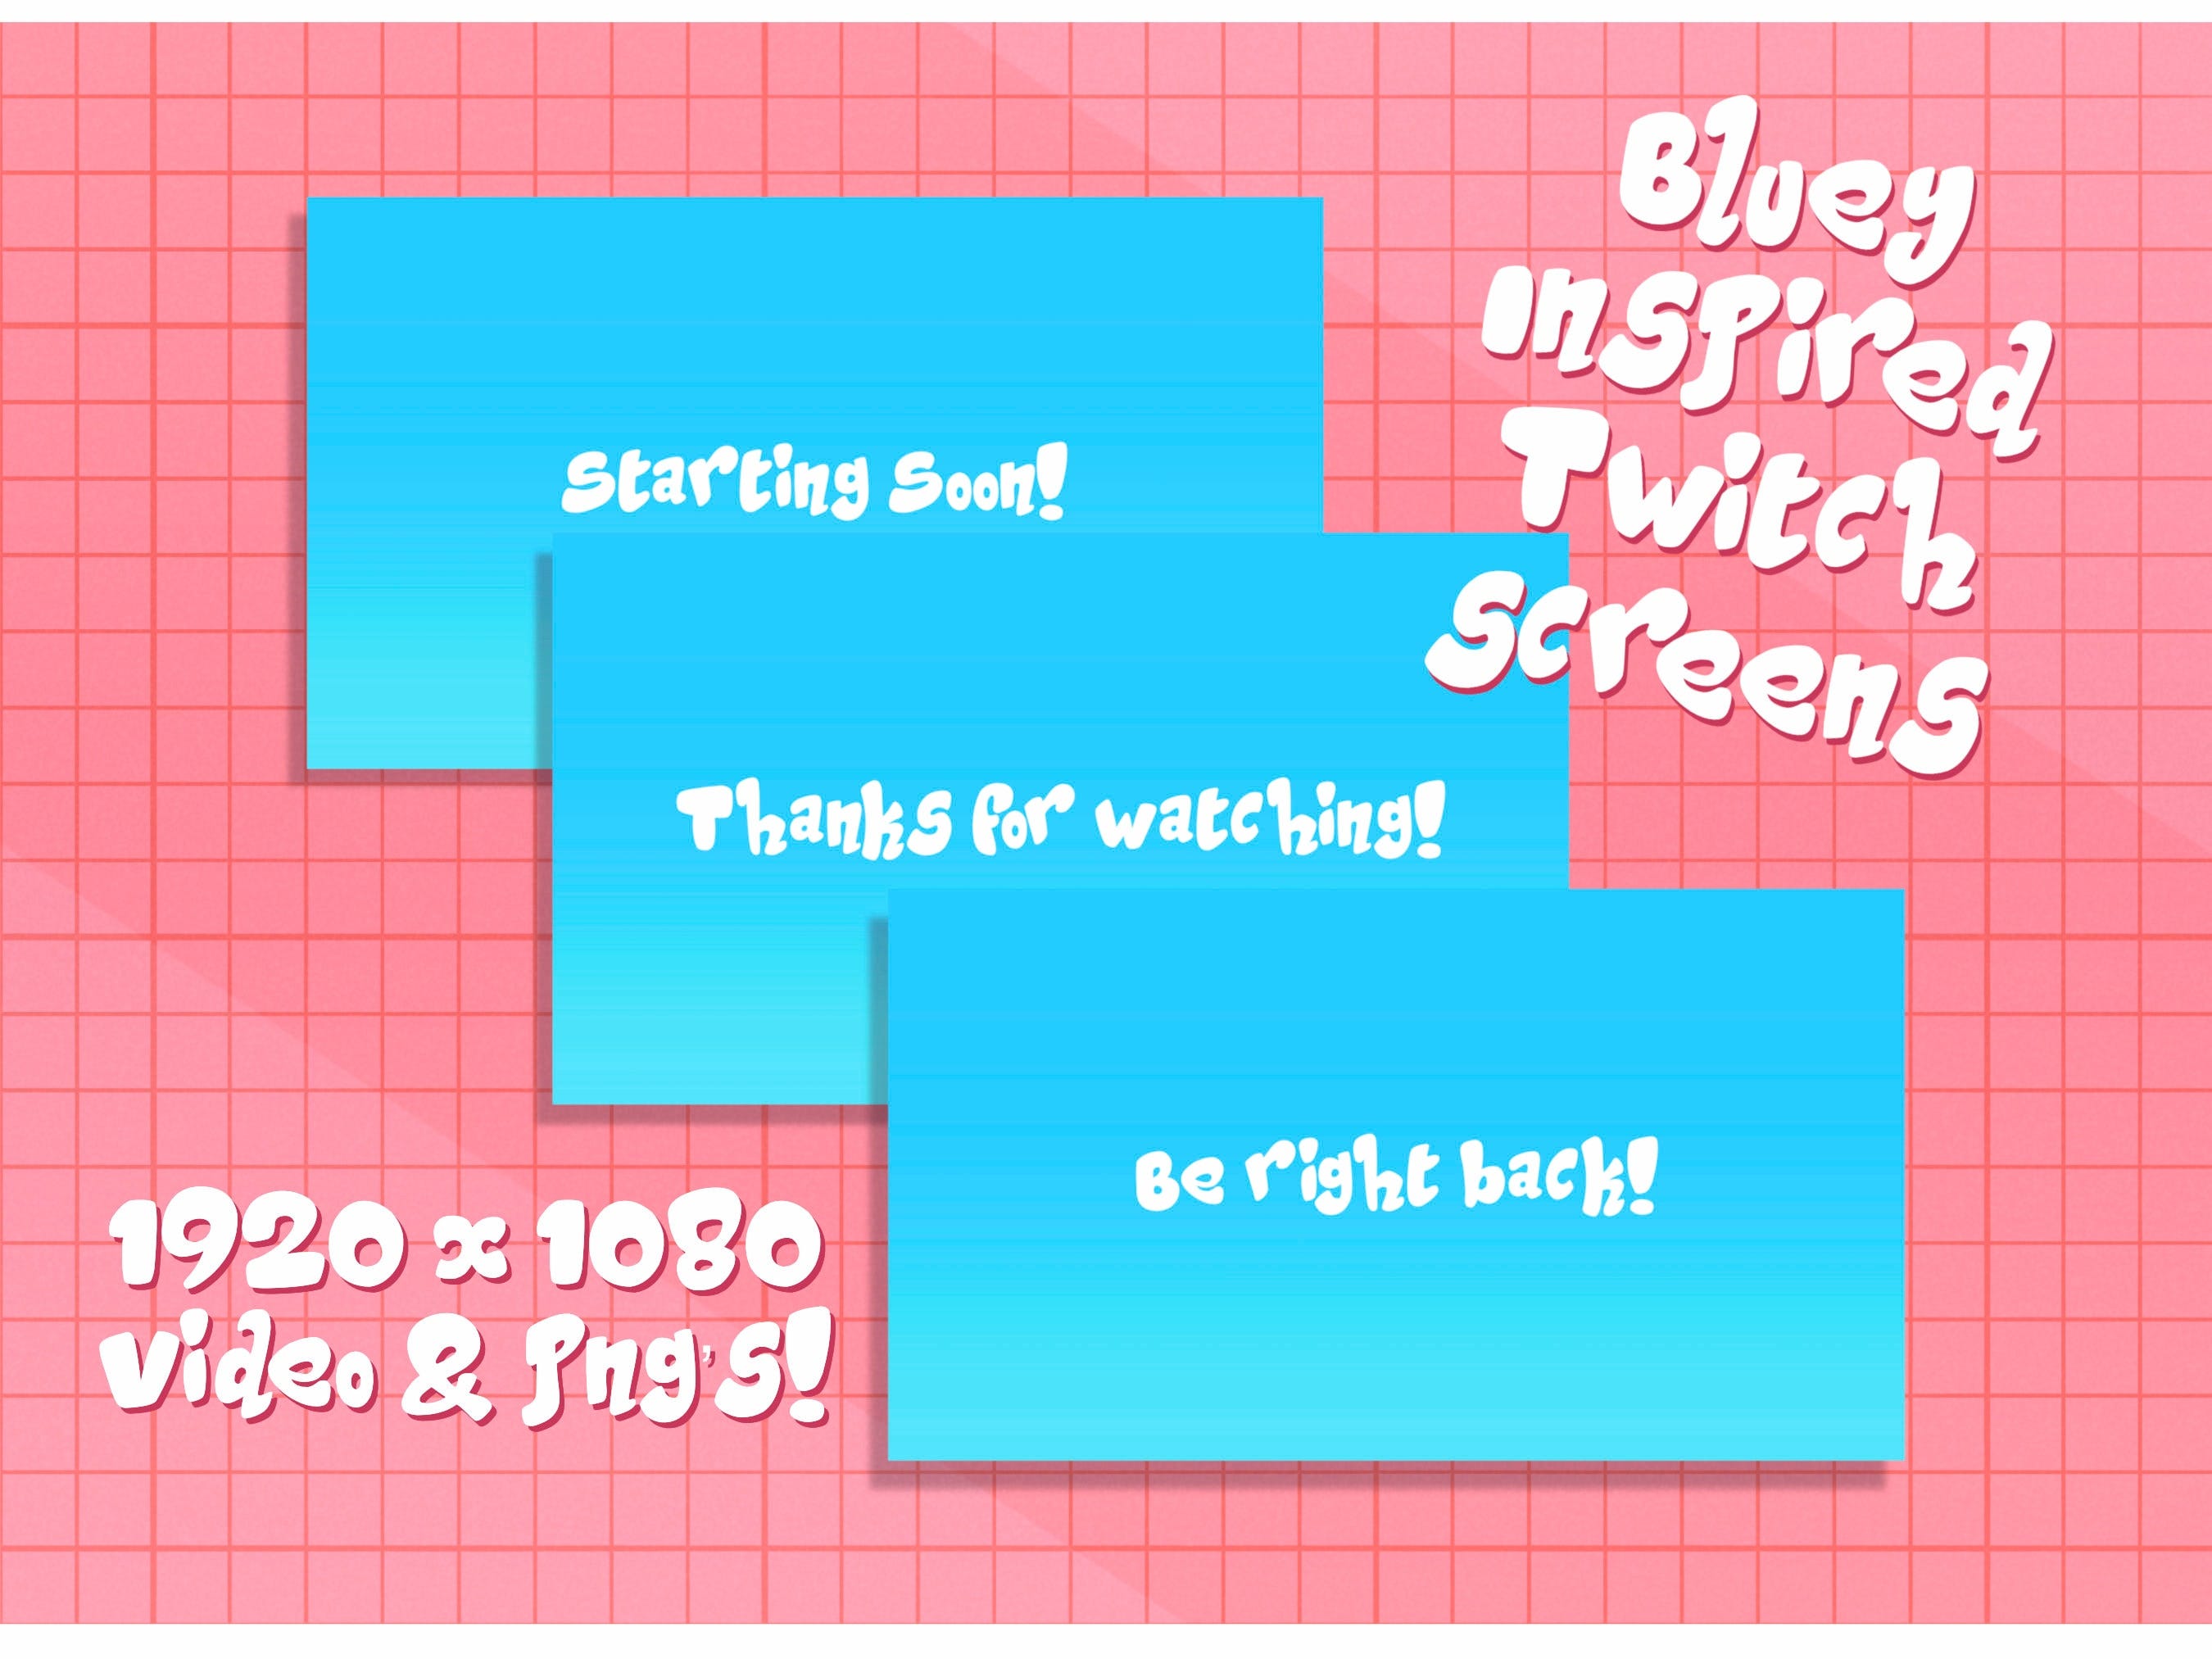 Bluey inspired screens for streams